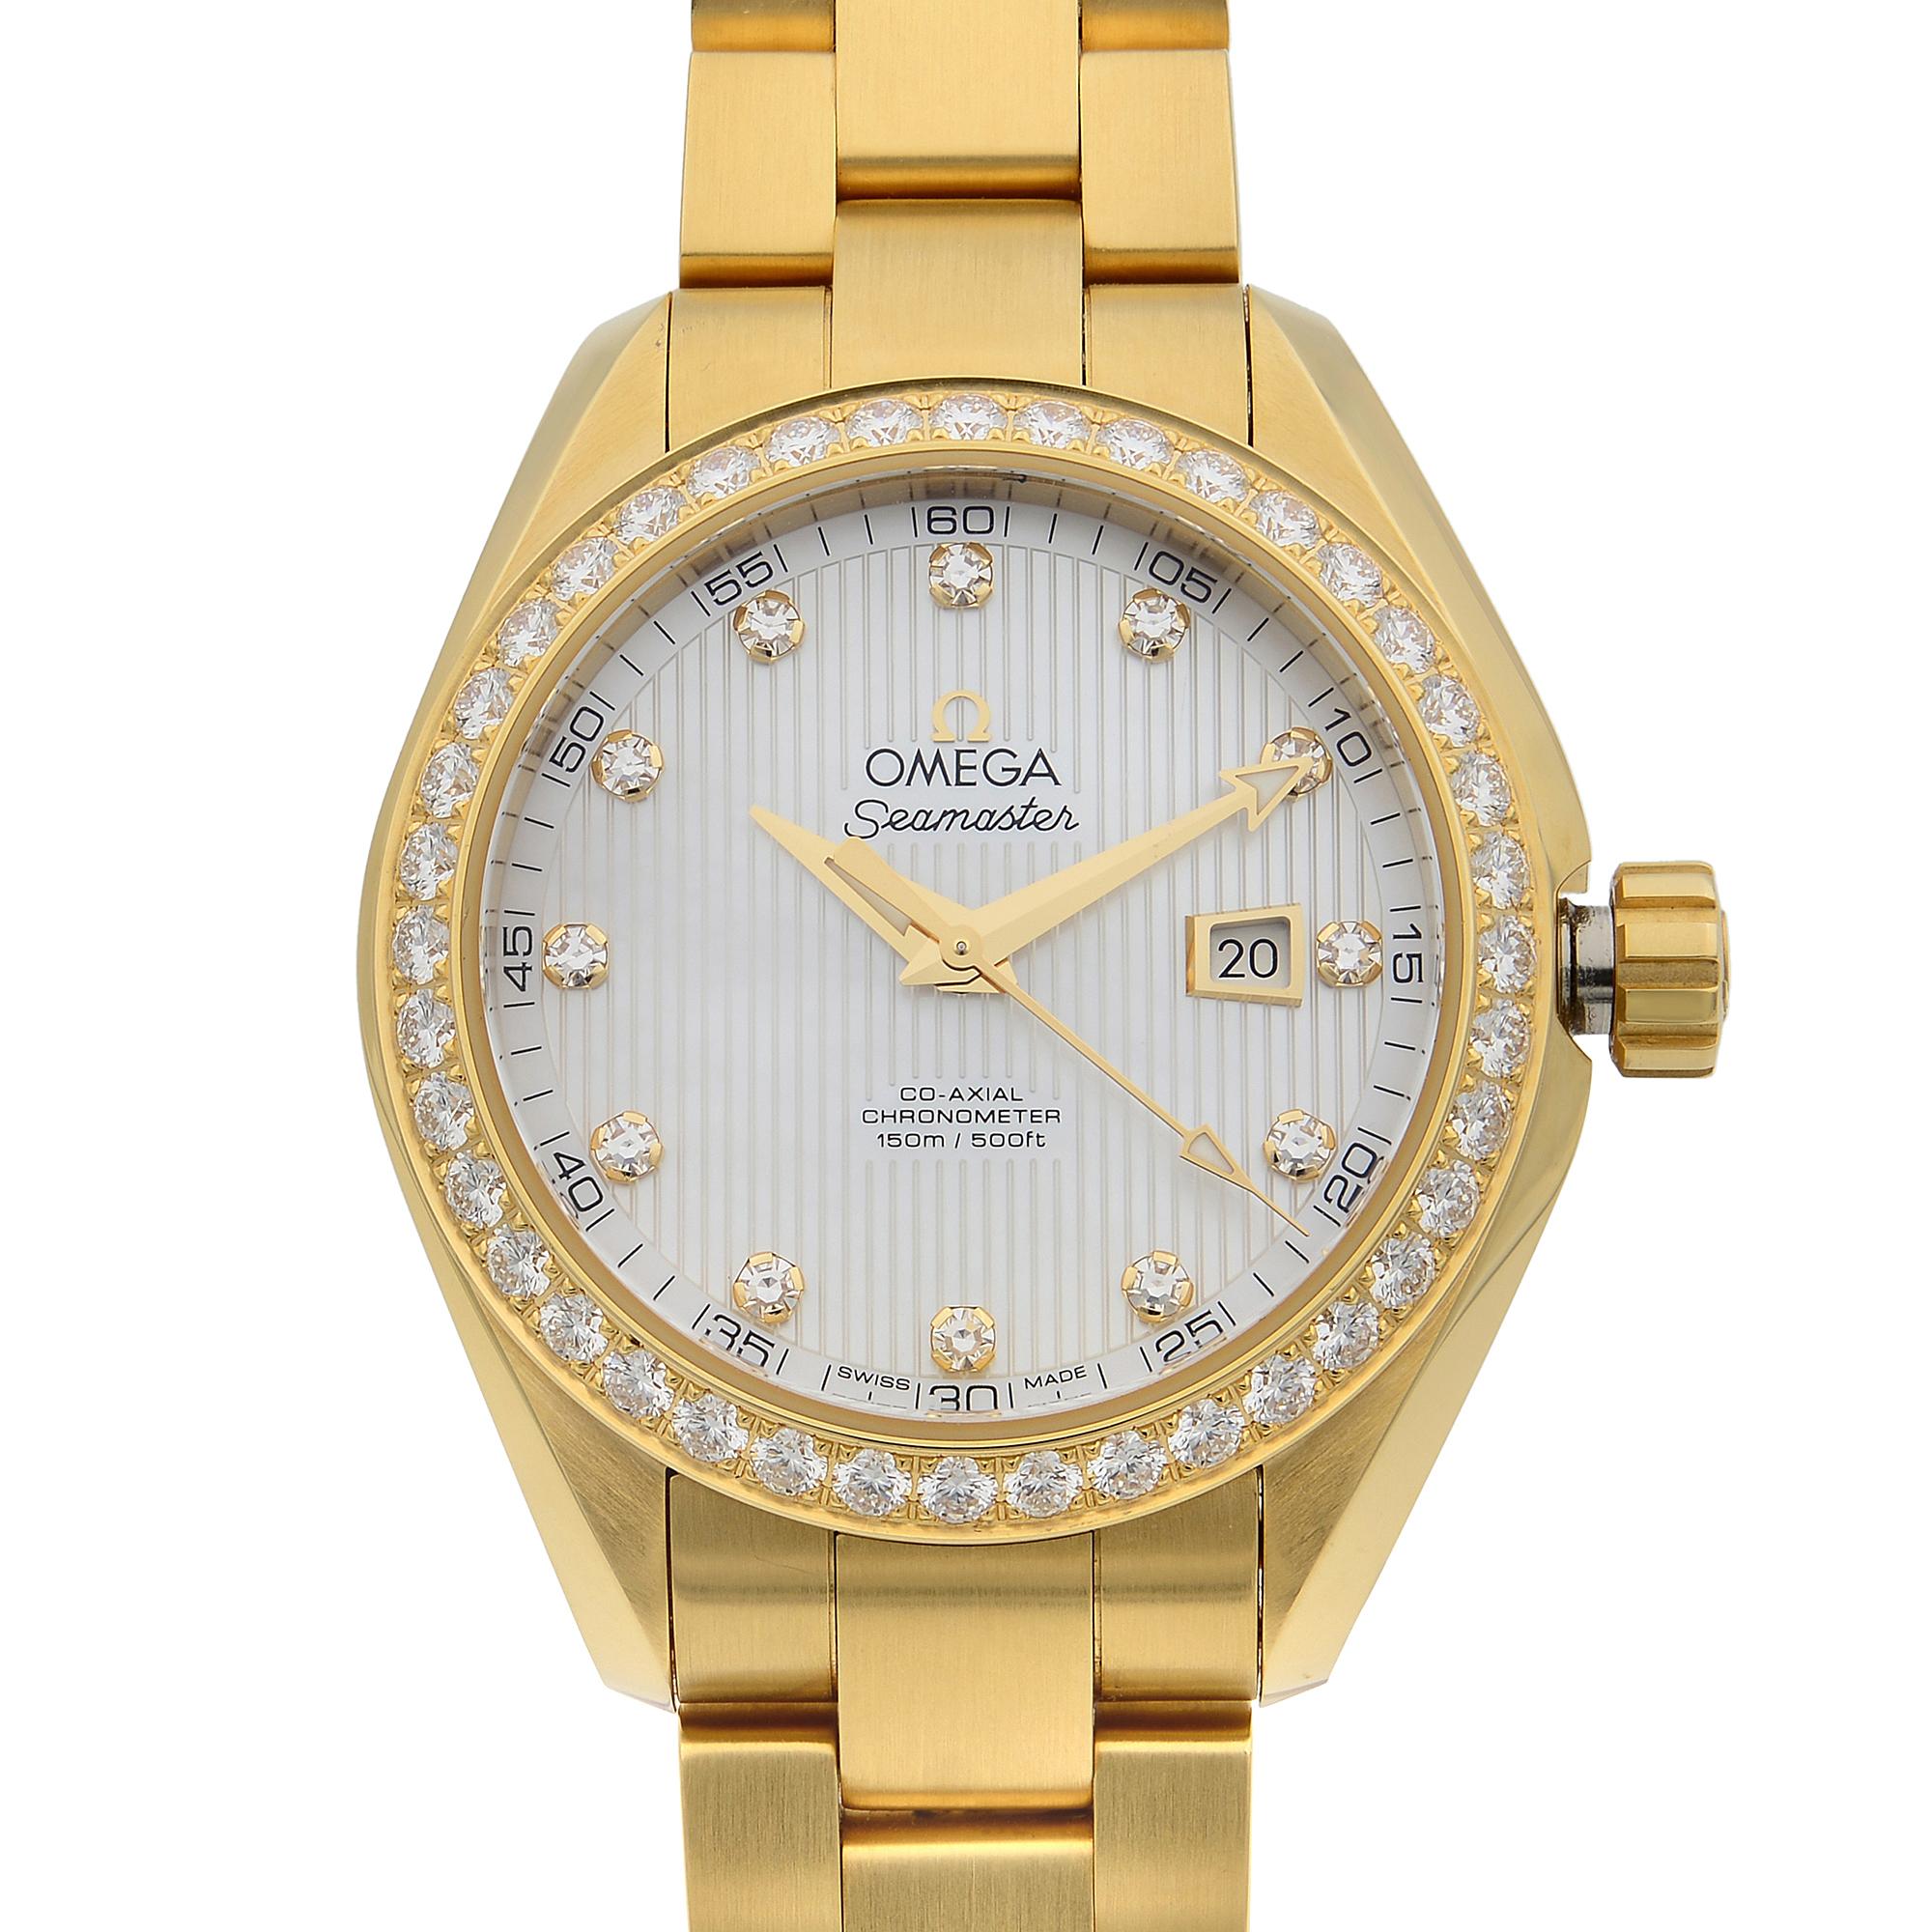 omega gold and diamond watch